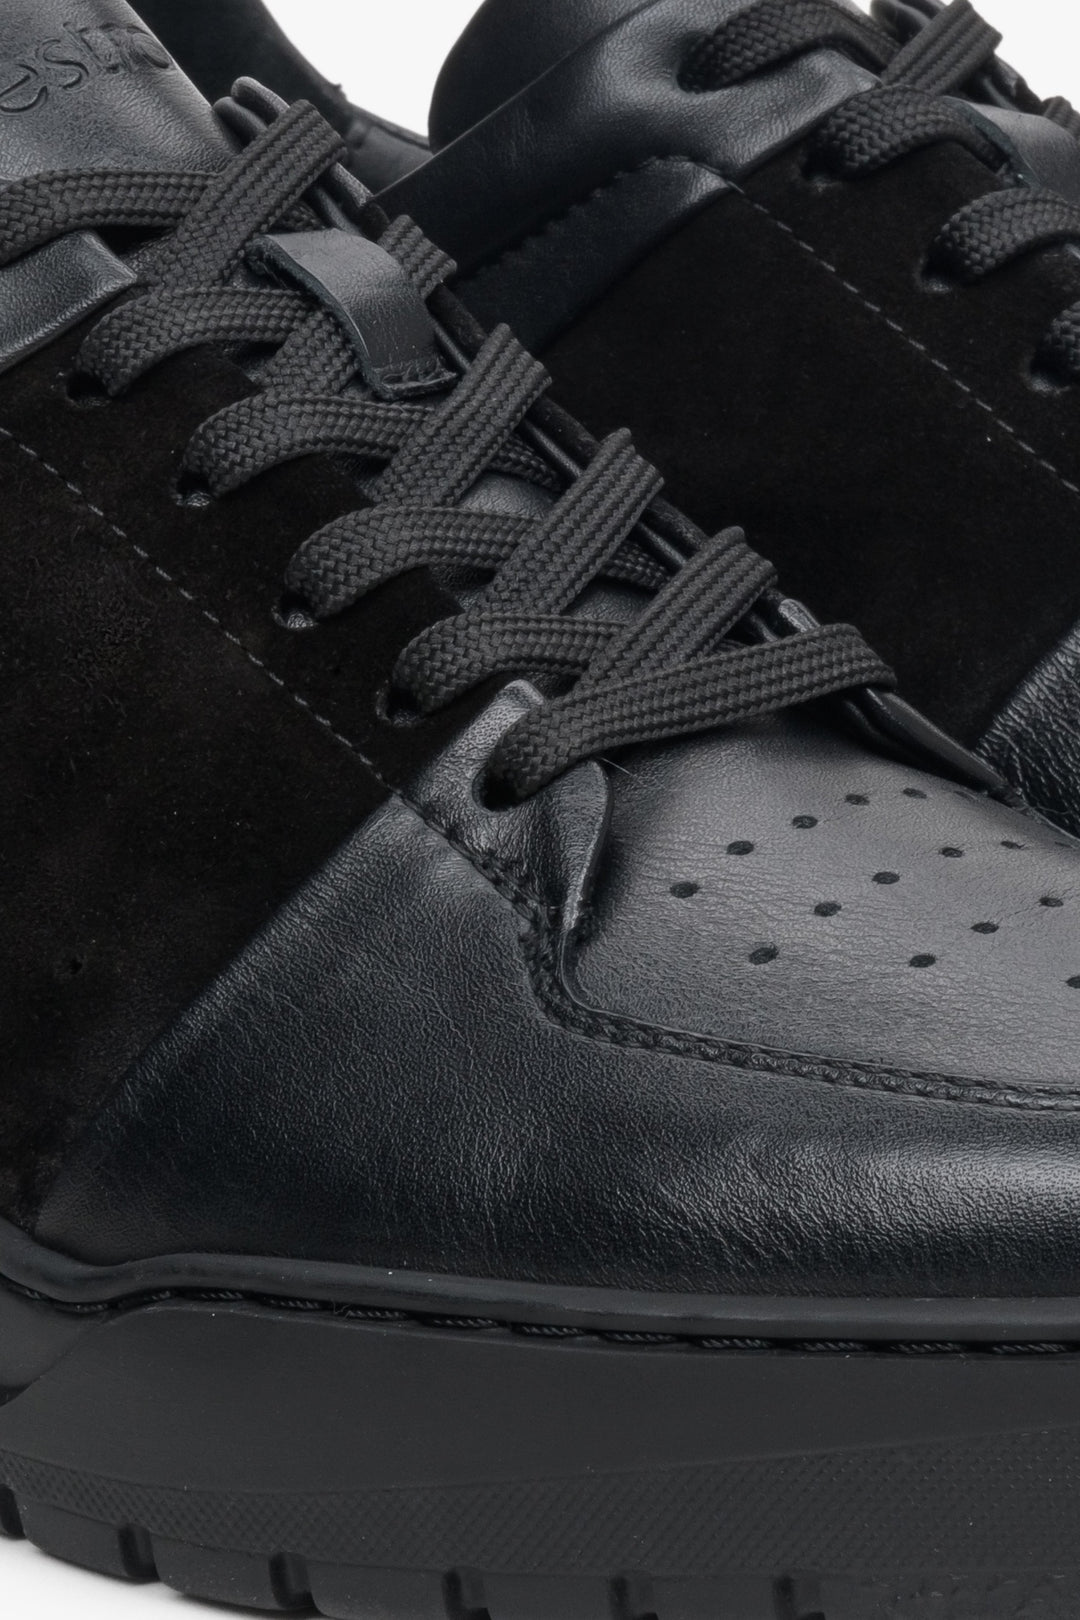 Men's sneakers in black leather and velvet by Estro - close-up on the detail.